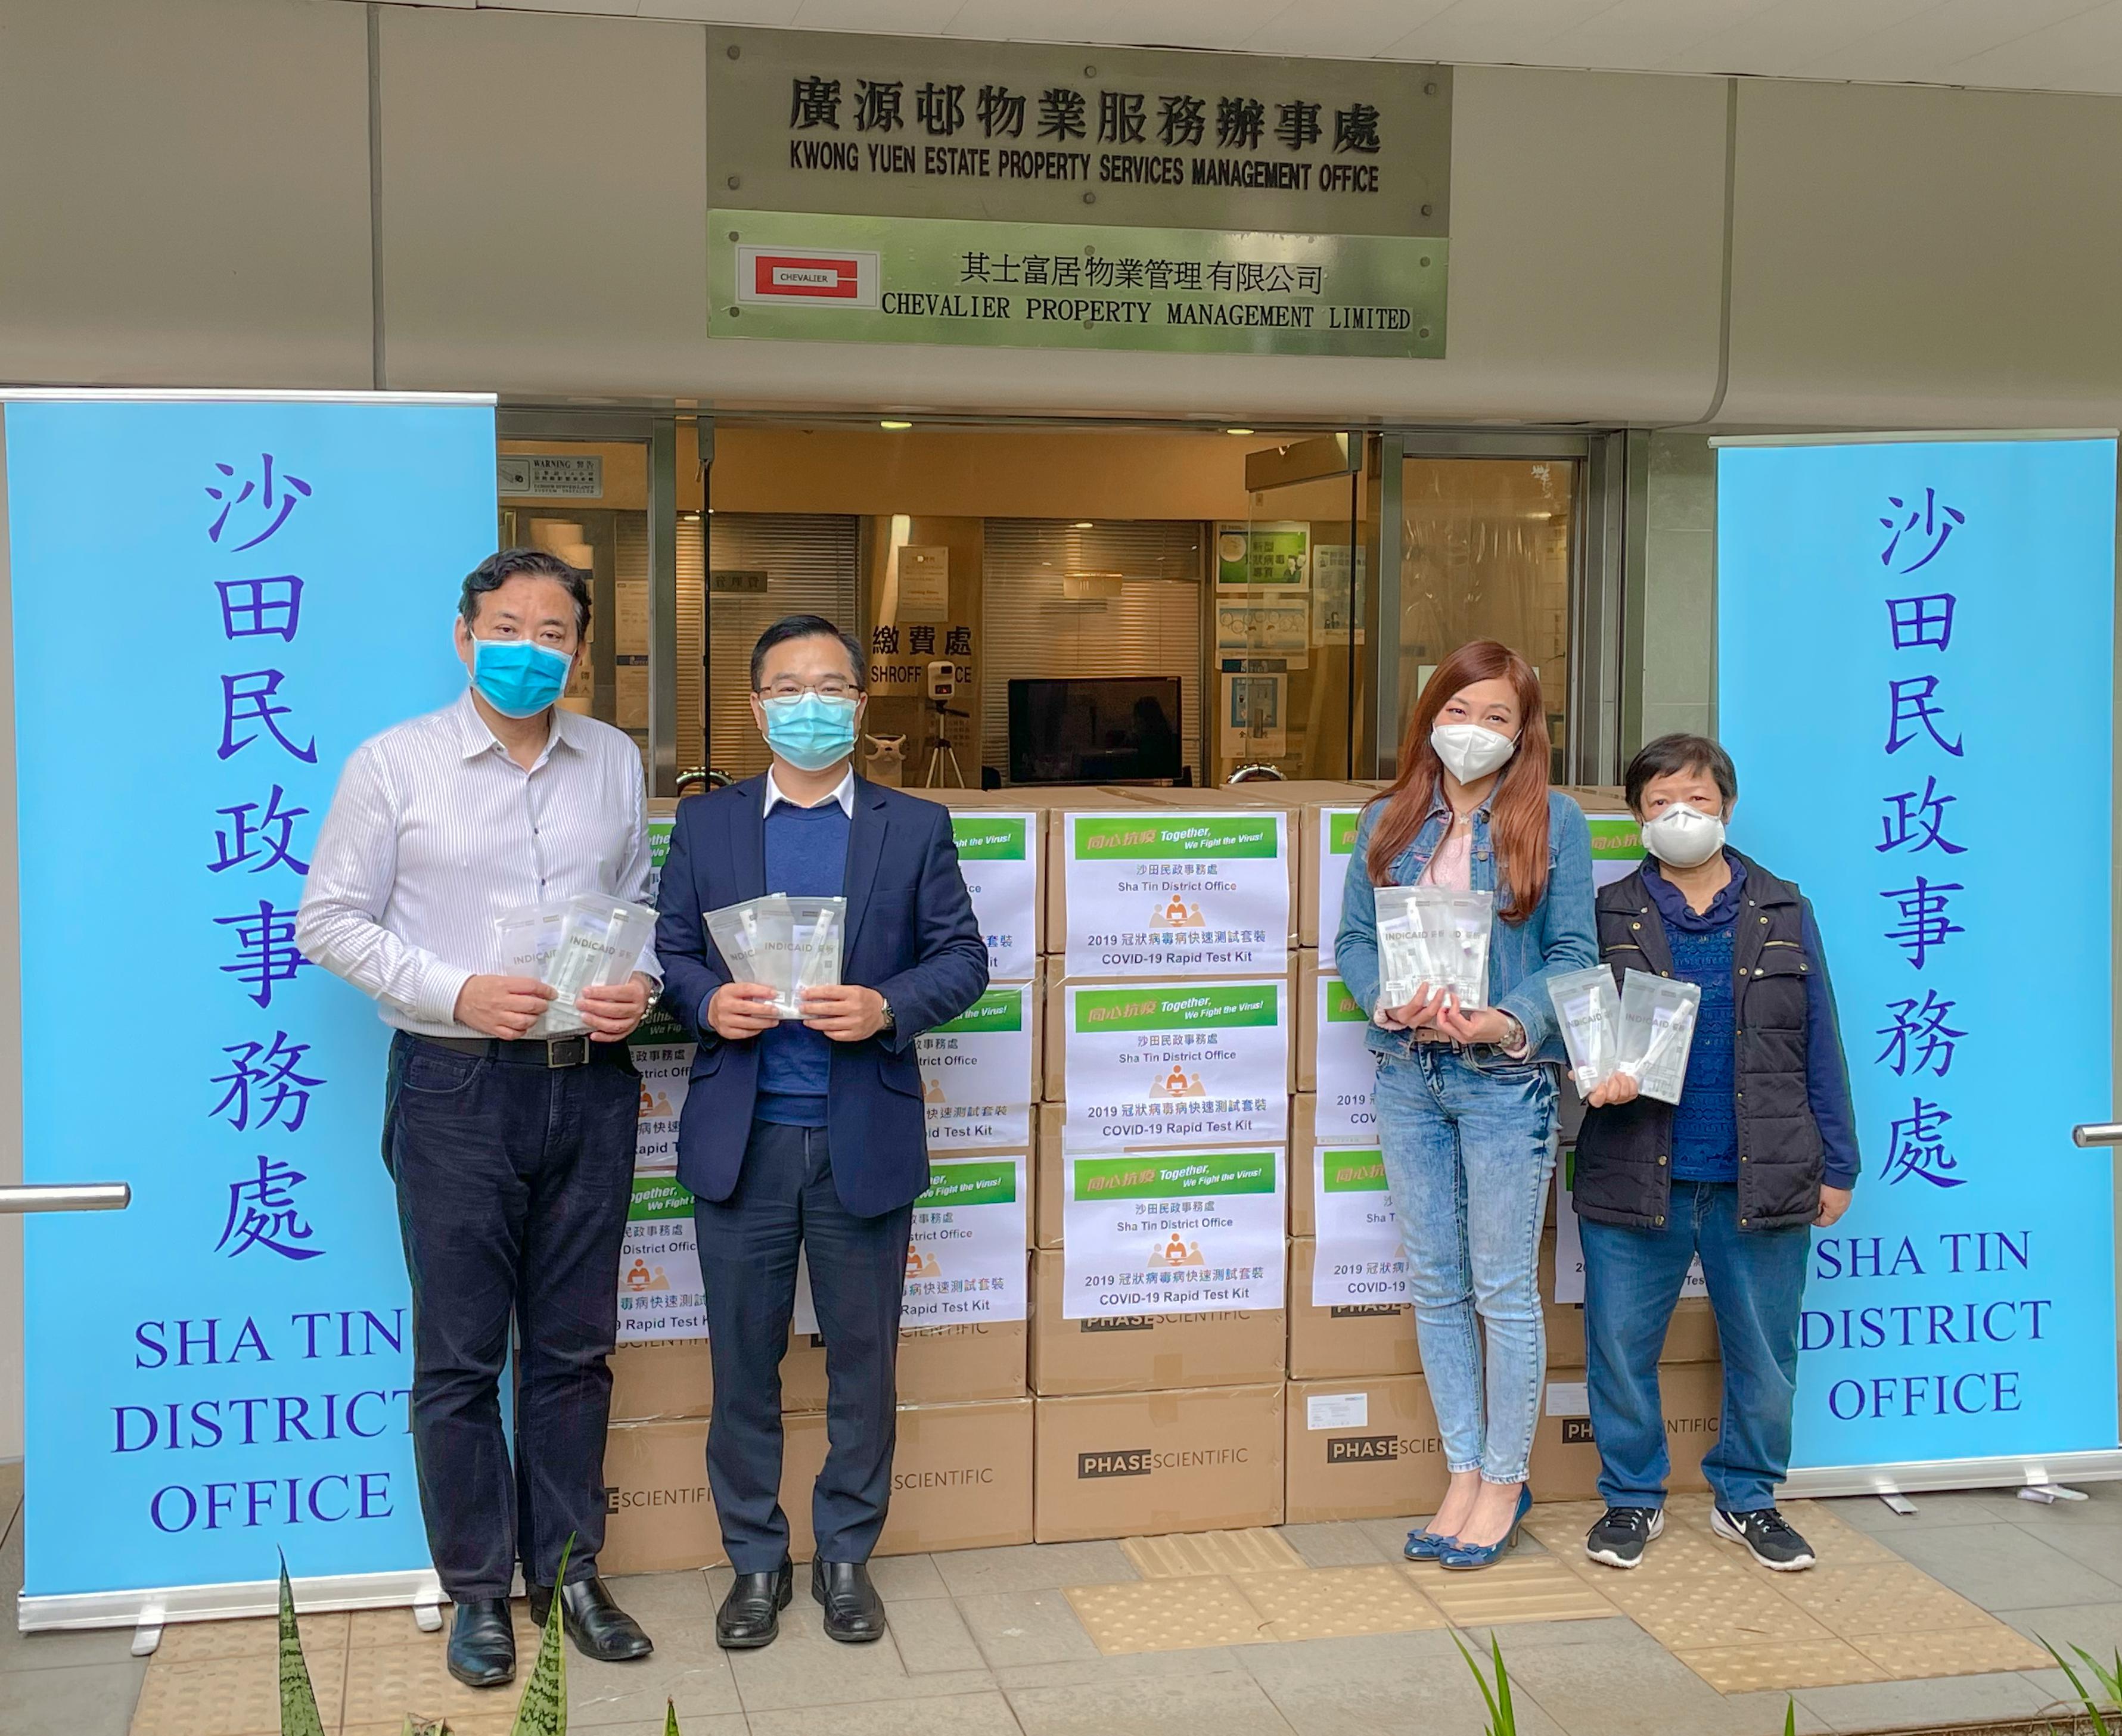 The Sha Tin District Office today (March 28) distributed COVID-19 rapid test kits to households, cleansing workers and property management staff living and working in Kwong Yuen Estate for voluntary testing through the property management company.